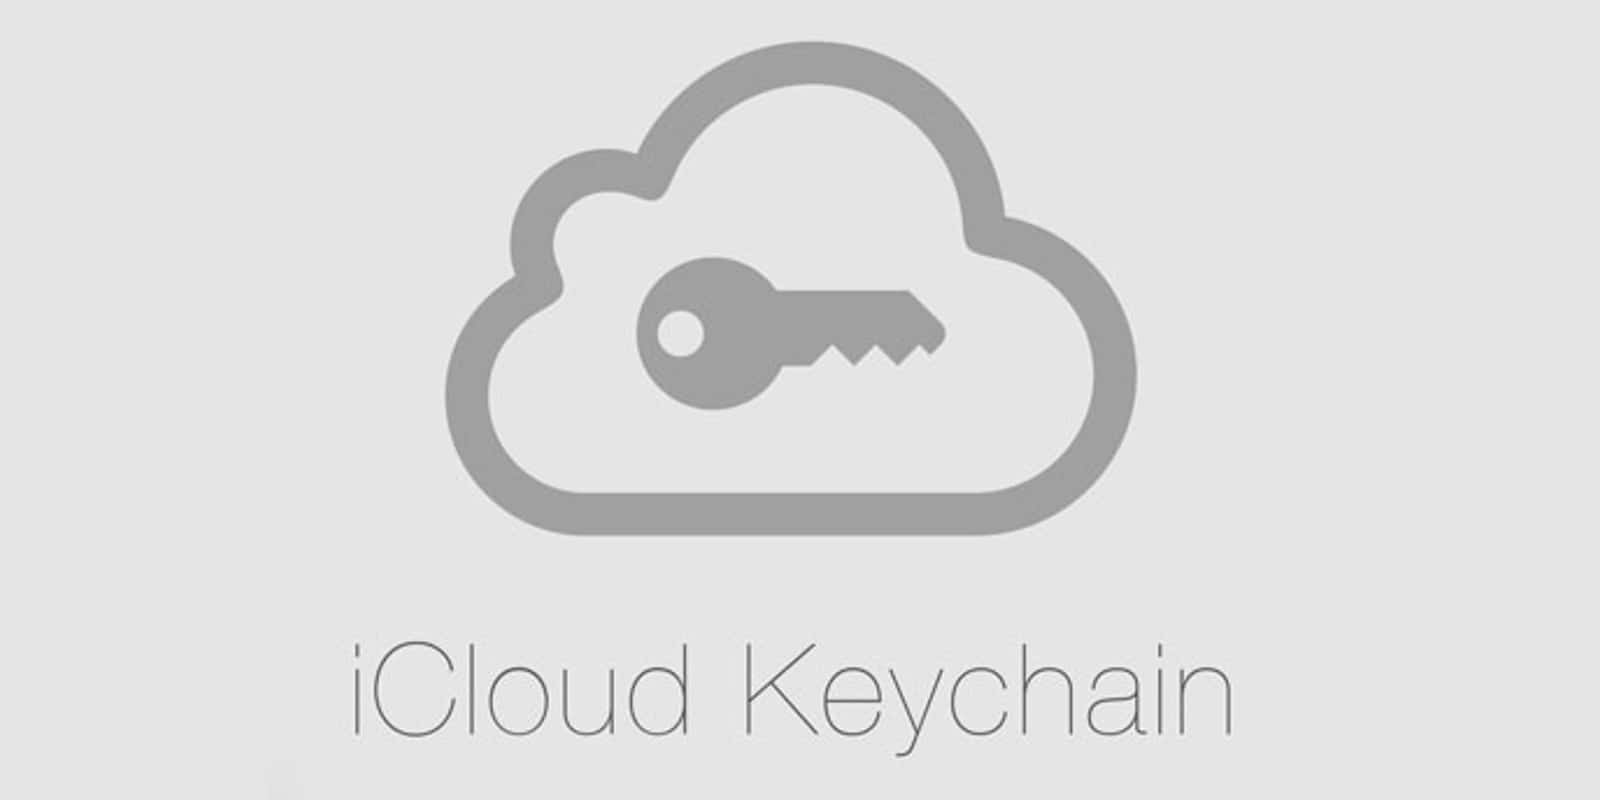 Logo of iCloud Keychain, which the Phone Breaker can crack.